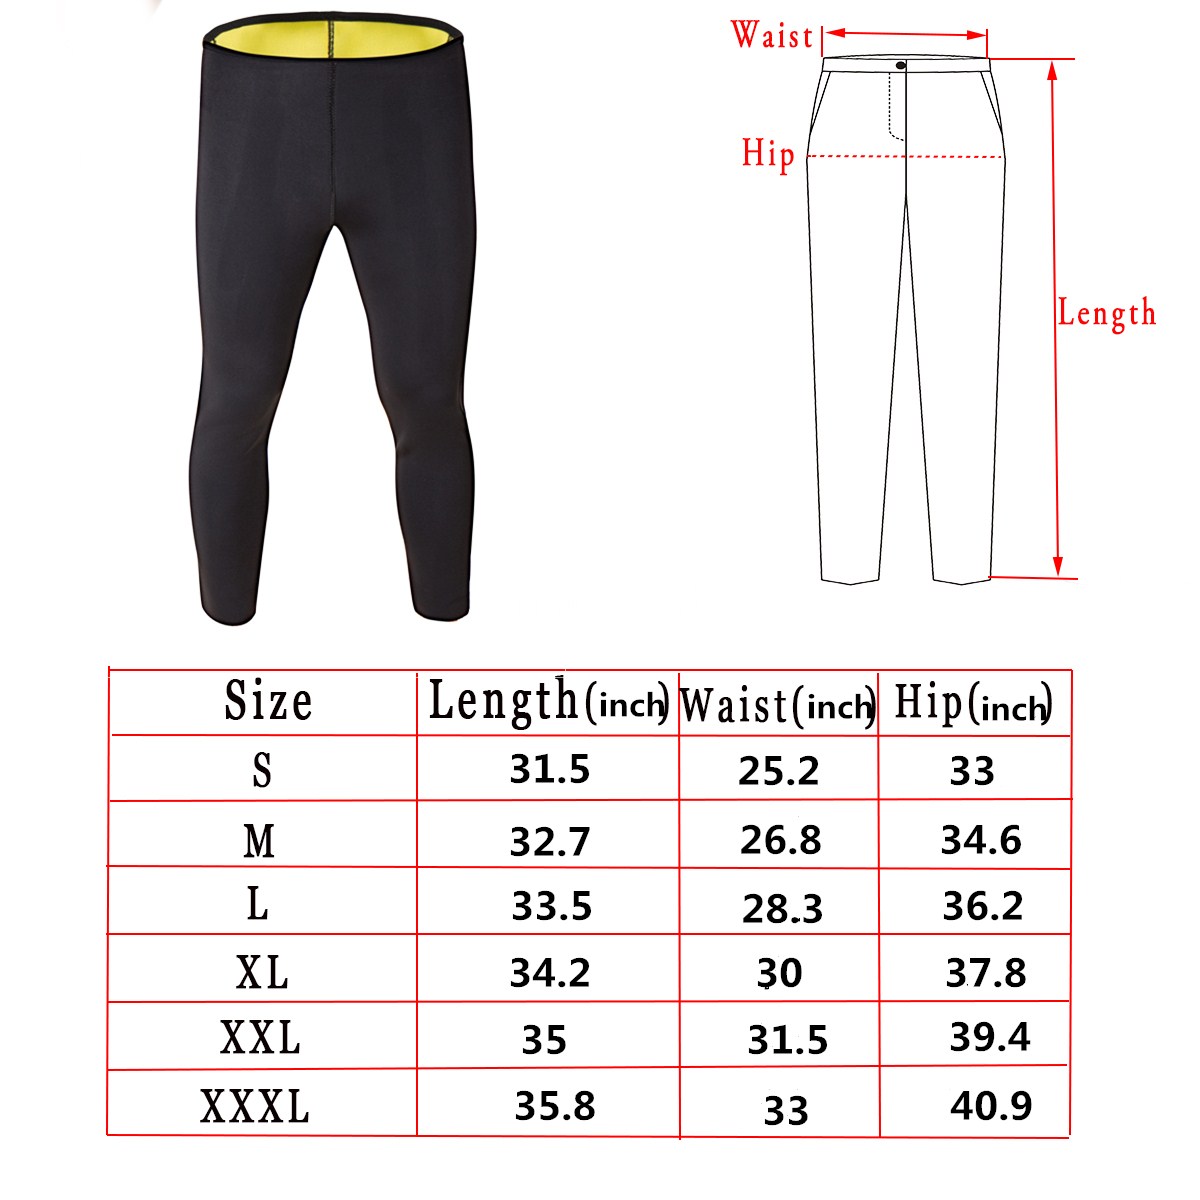 Unisex-Neoprene-Hot-Body-Accelerate-Sweating-Slimming-Fitness-Trousers-Yoga-Sports-Pants-1447219-6